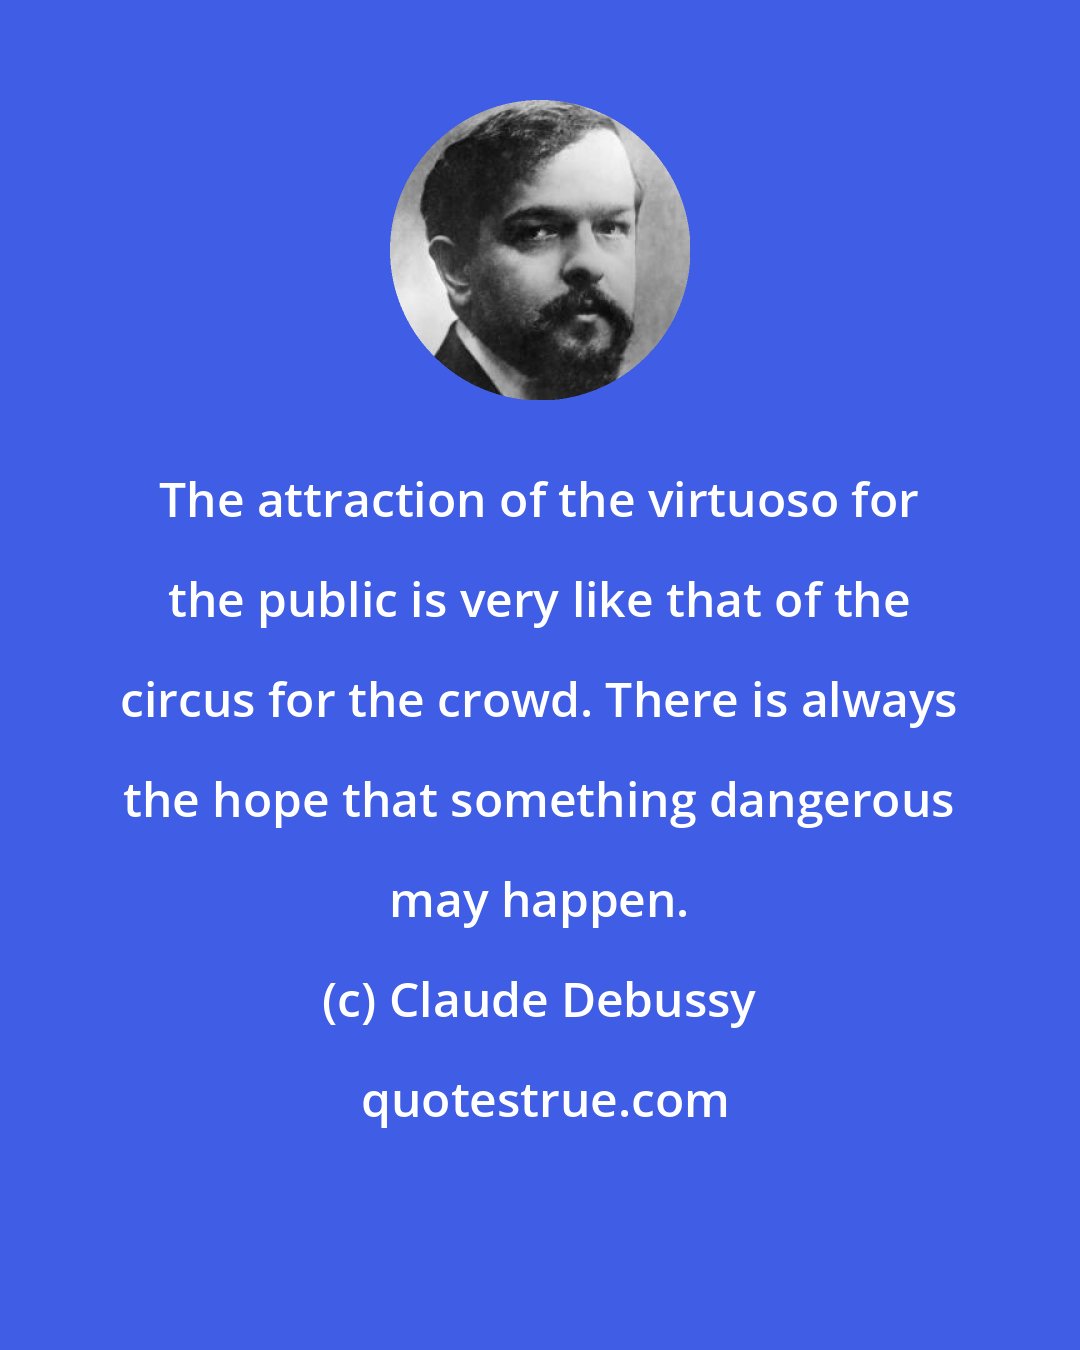 Claude Debussy: The attraction of the virtuoso for the public is very like that of the circus for the crowd. There is always the hope that something dangerous may happen.